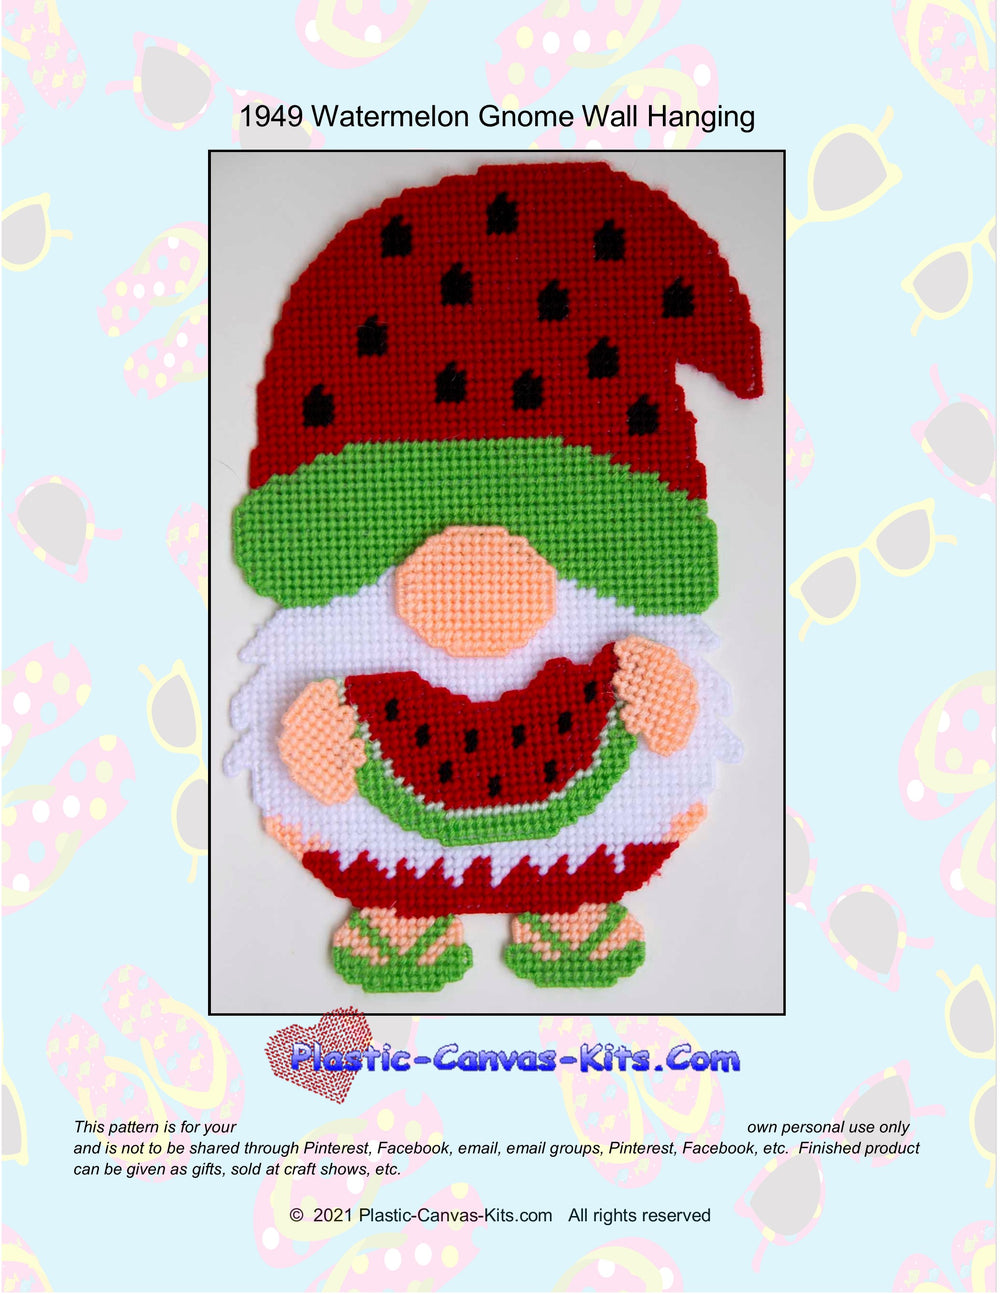 Summer Gnome with Watermelon Wall Hanging